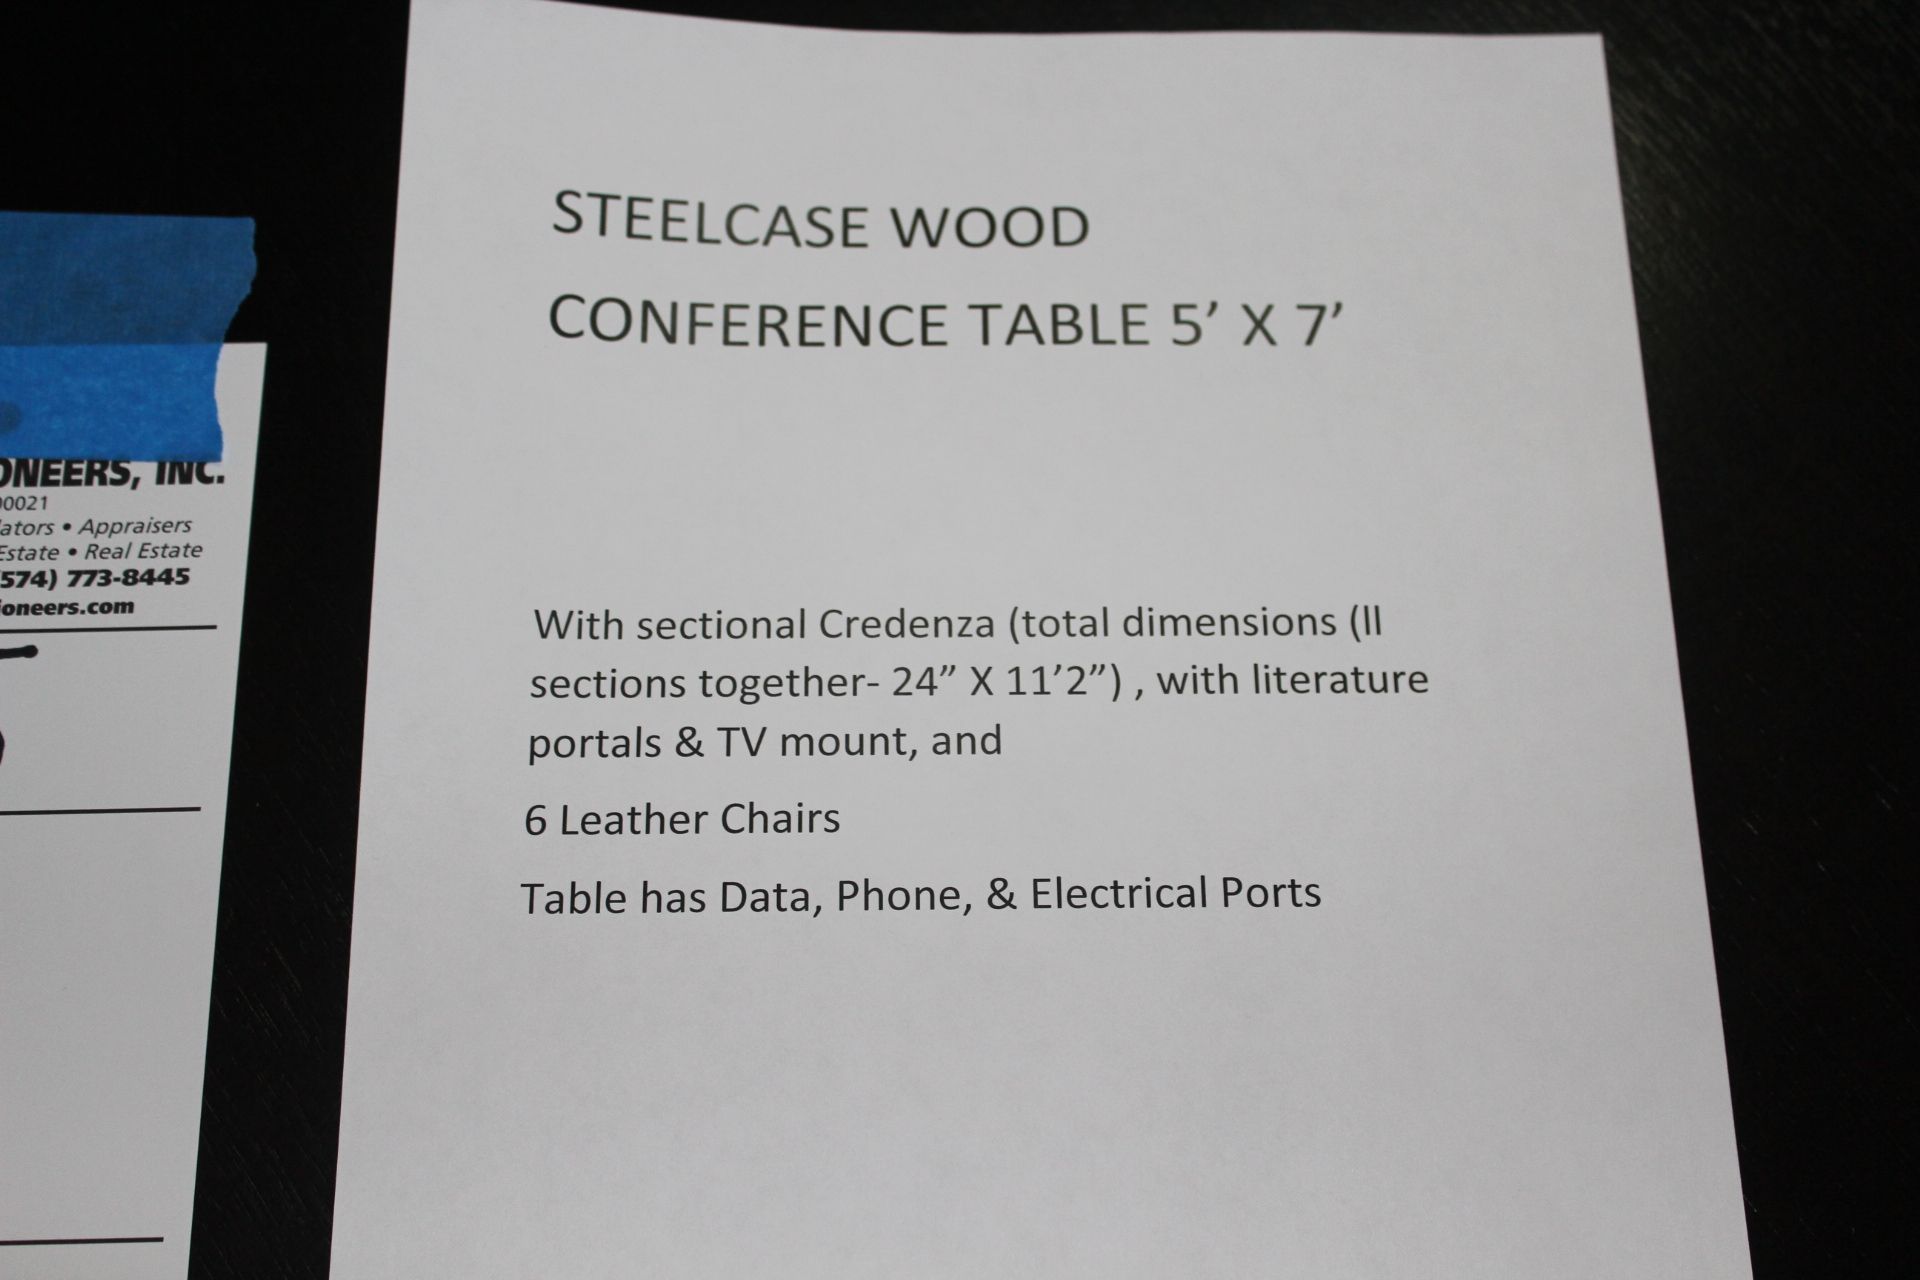 Steelcase Wood Conference Table - Image 7 of 7